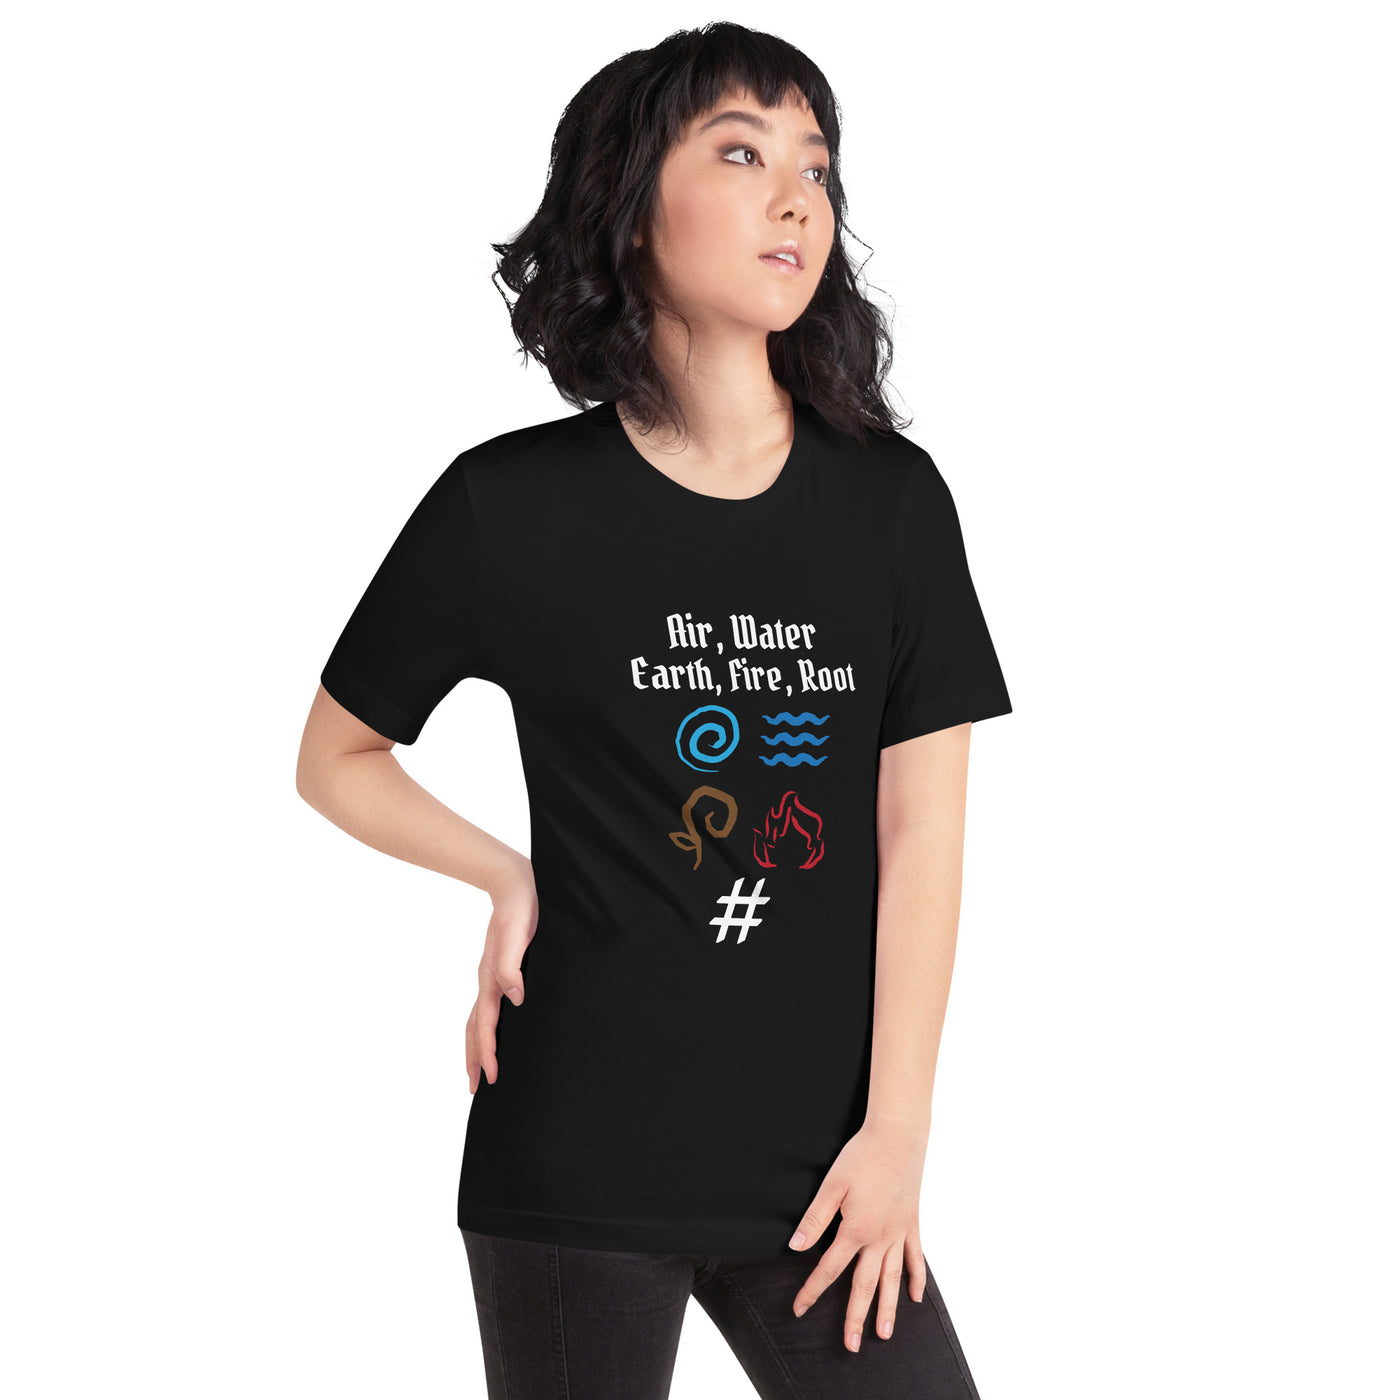 Air, Water, Earth, Fire, Root - Unisex t-shirt